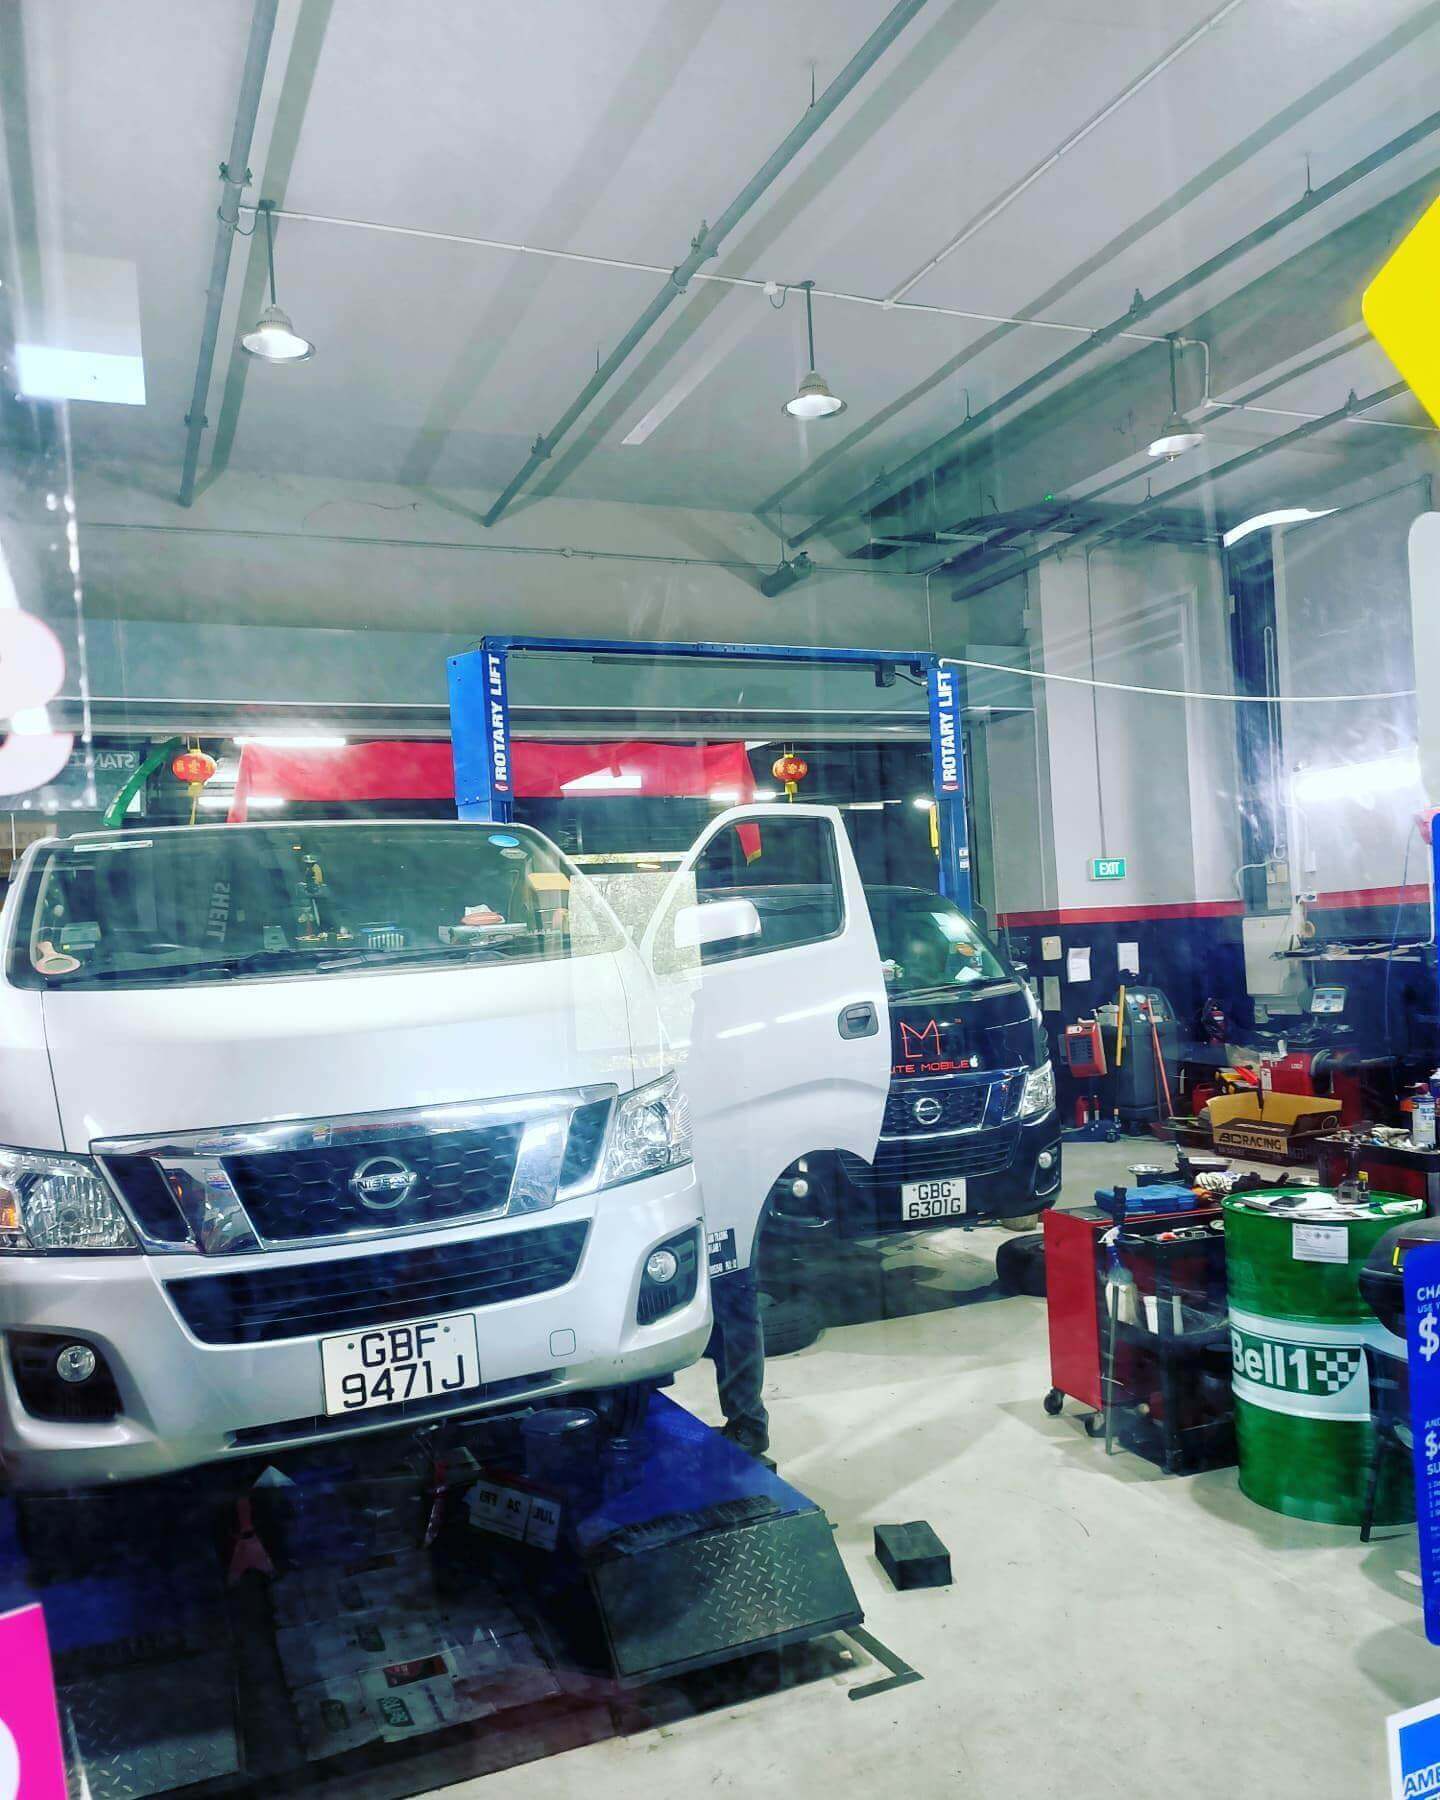 Car Service & Repair WorkShop For Sale In Good Location